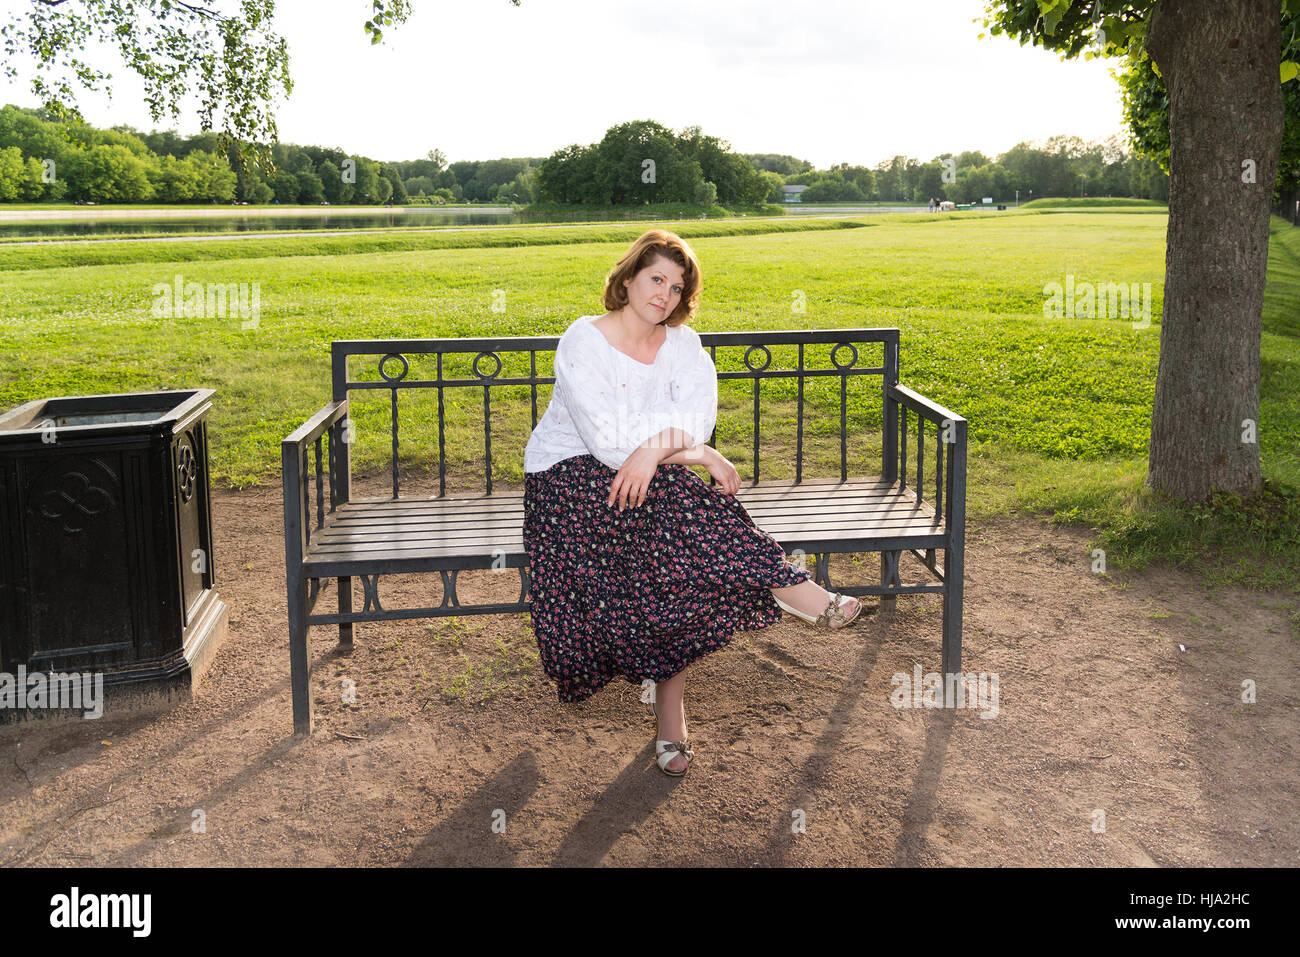 woman sitting on bench in summer park Stock Photo